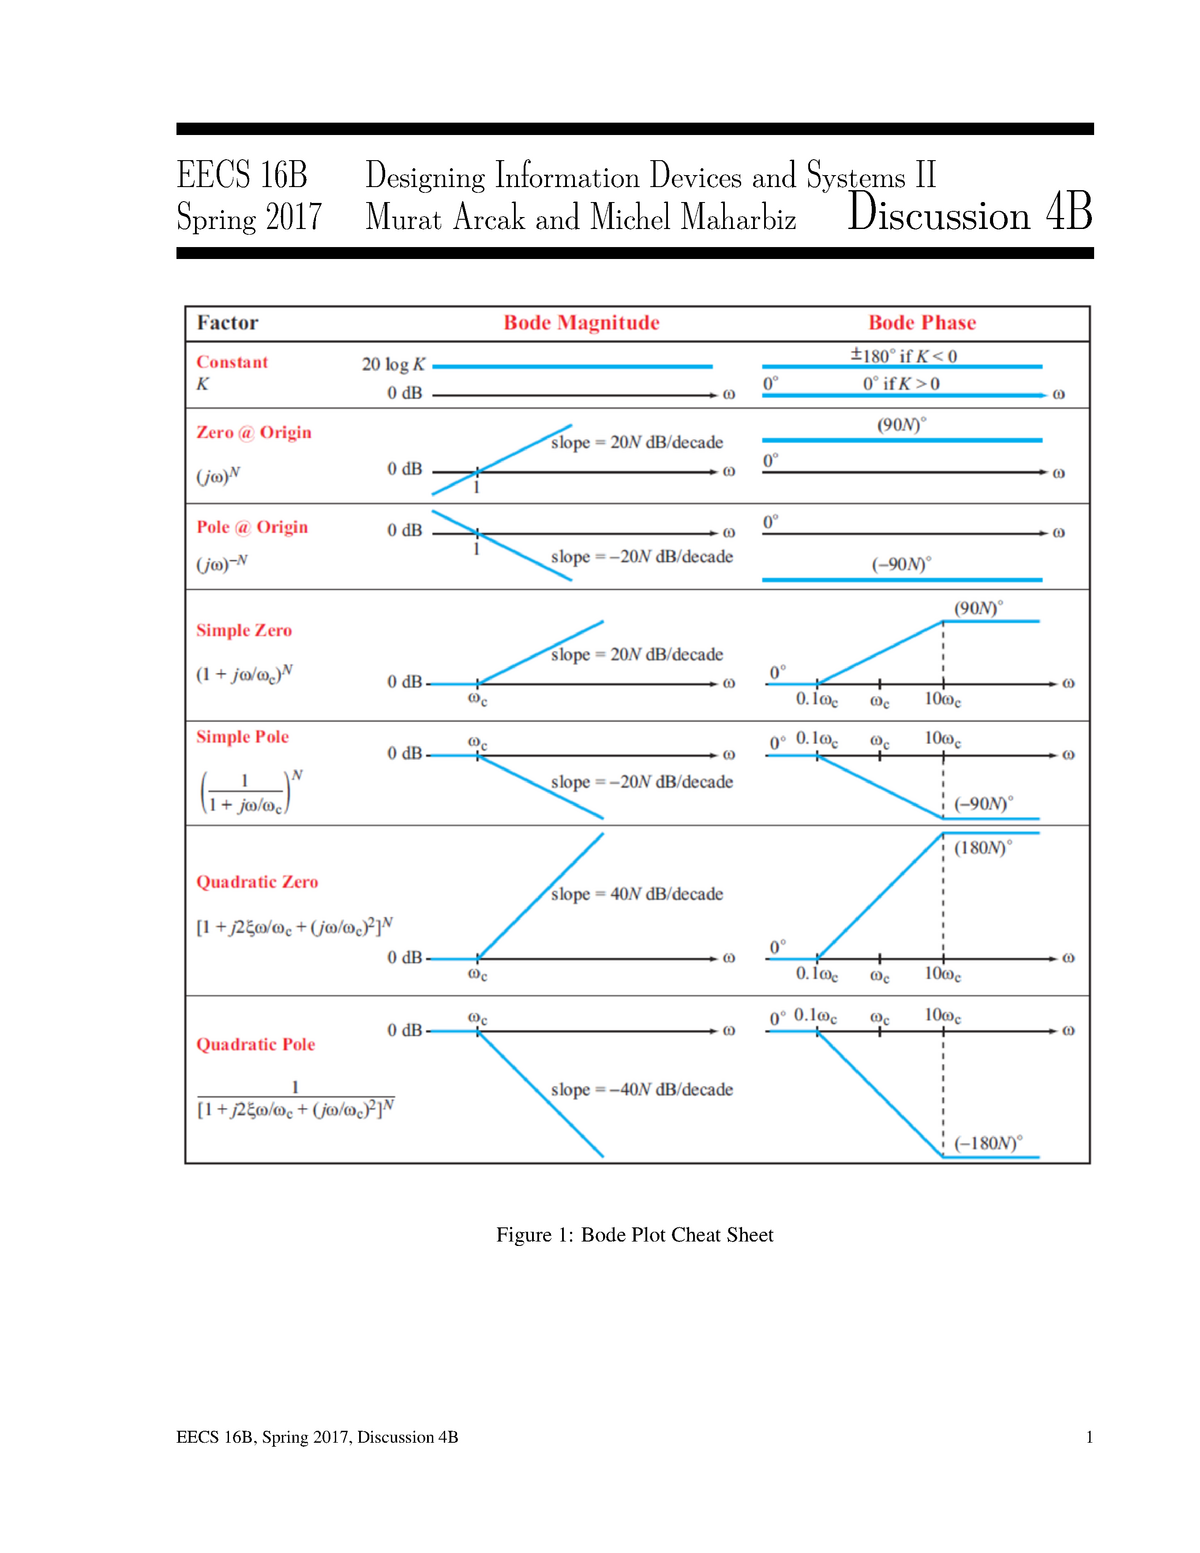 Bode cheat sheet for exam - EECS 16B Designing Information Devices and